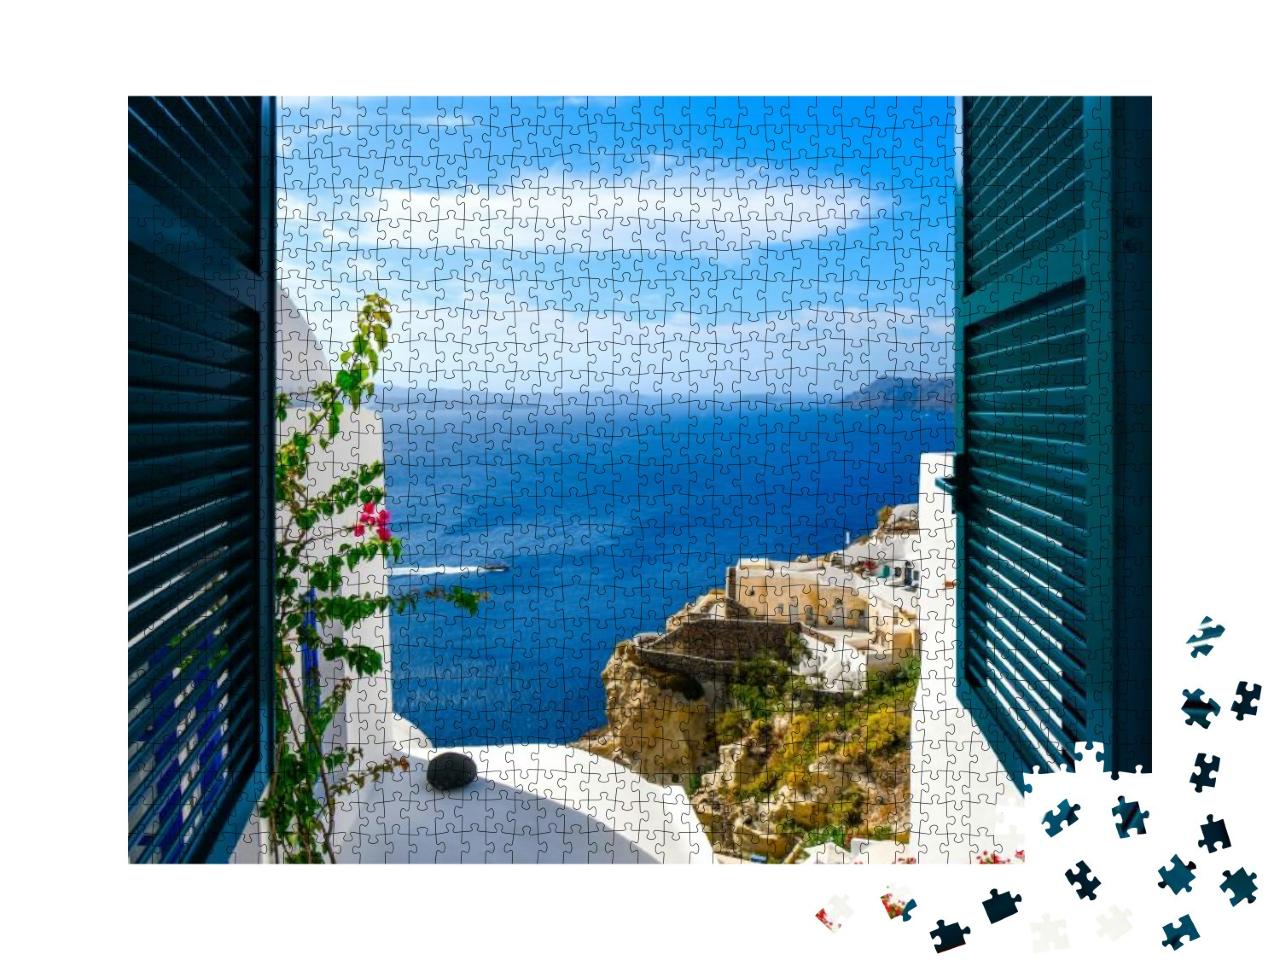 View from a Window Overlooking the Sea, Caldera & Whitewa... Jigsaw Puzzle with 1000 pieces